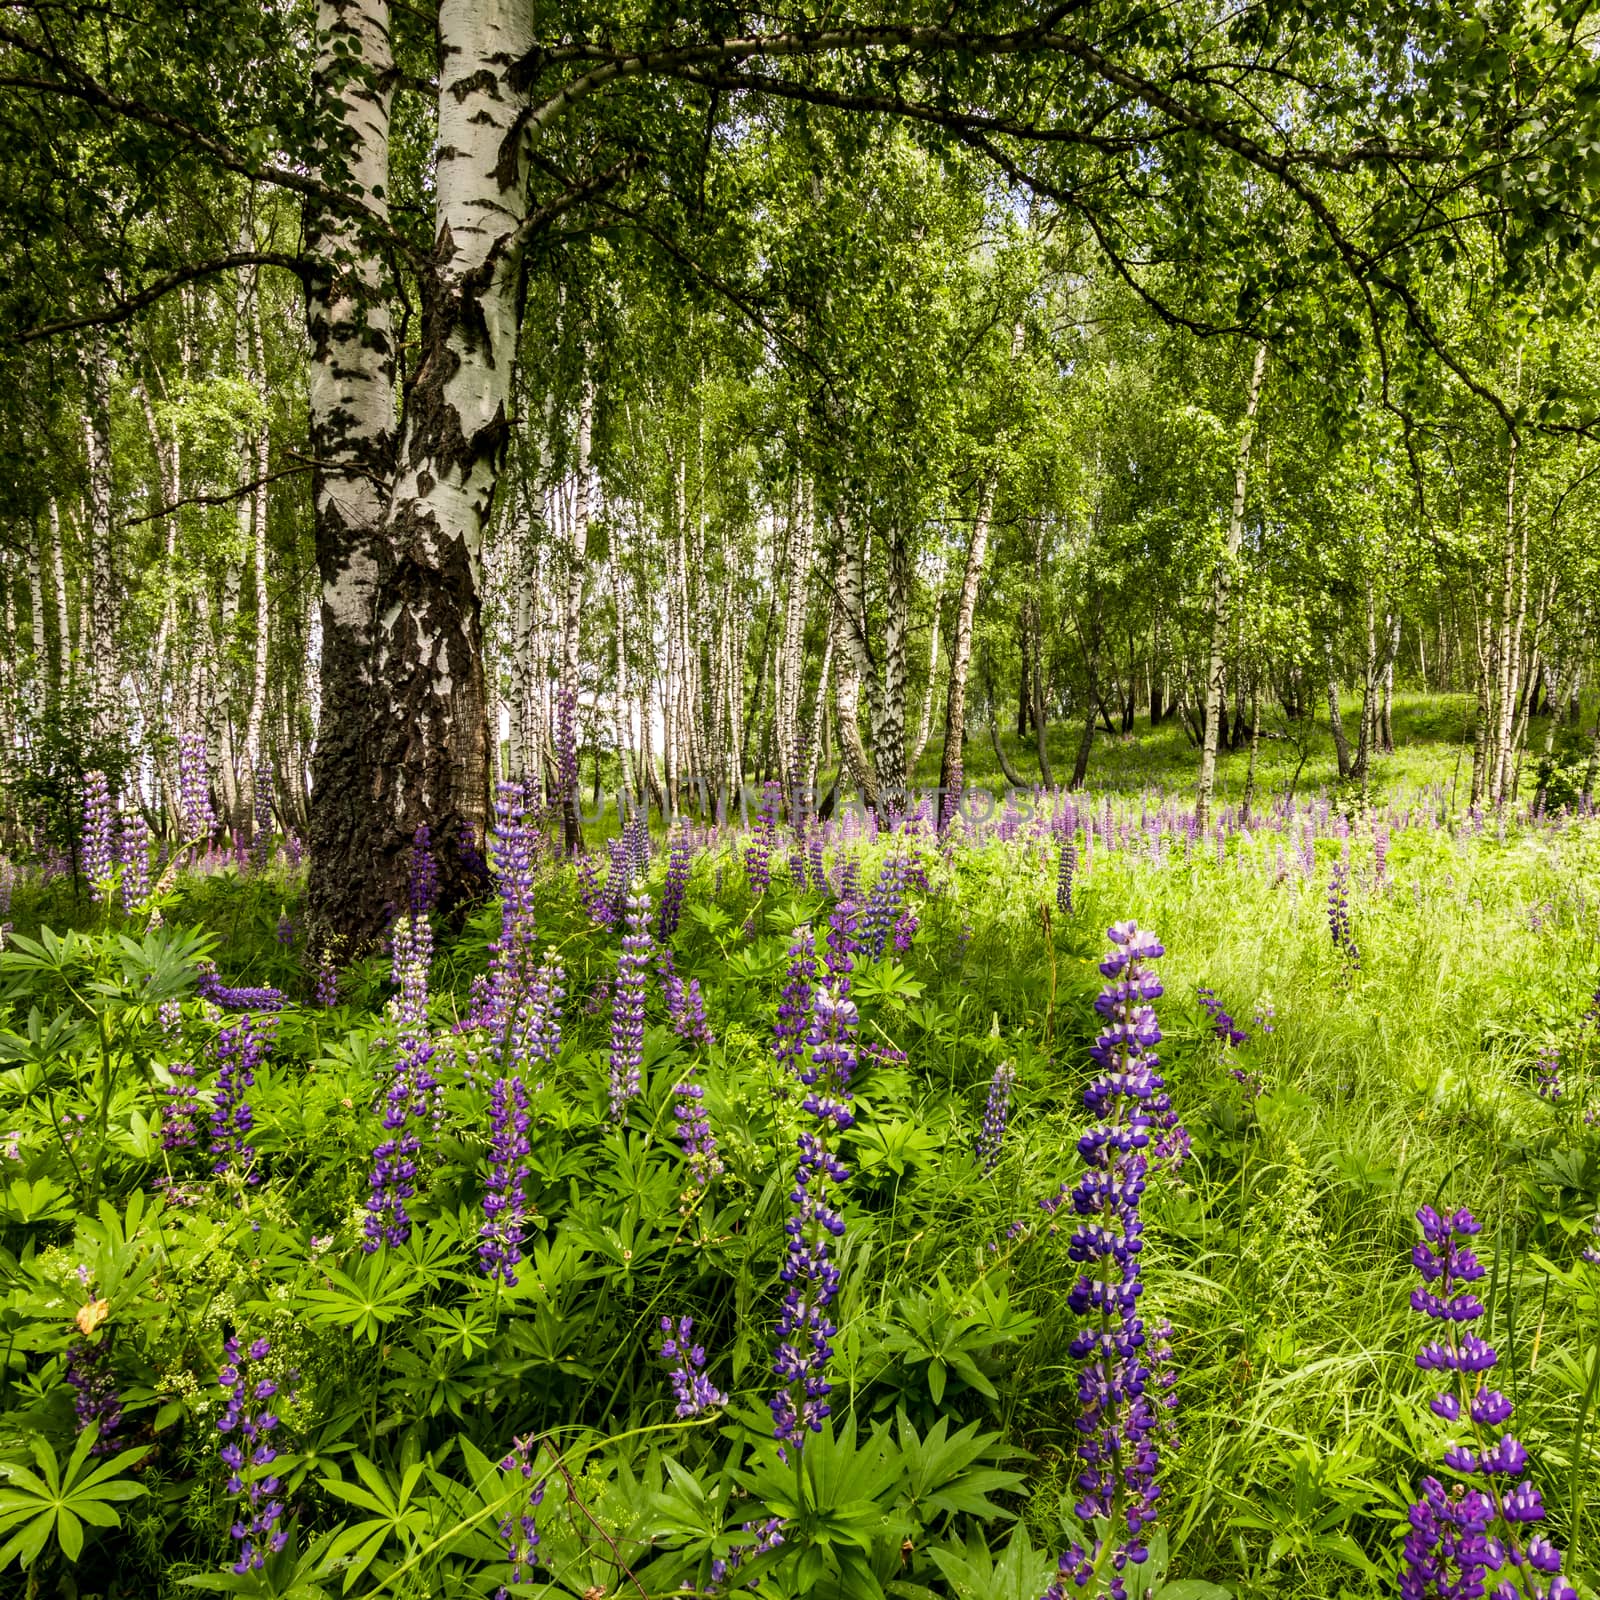 Purple lupins in a birch forest among the trunks on a summer day. Landscape.